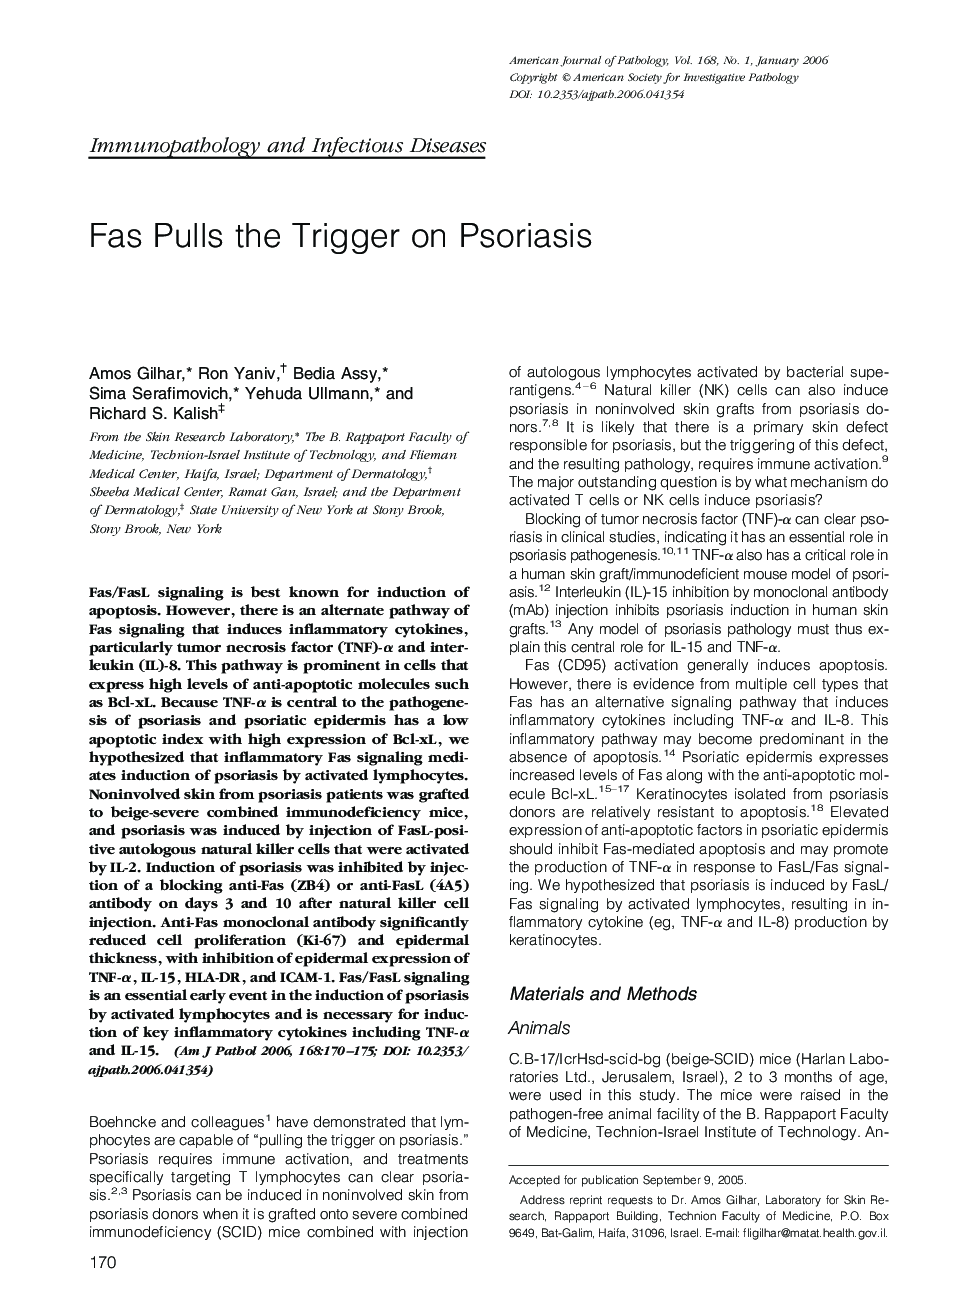 Fas Pulls the Trigger on Psoriasis